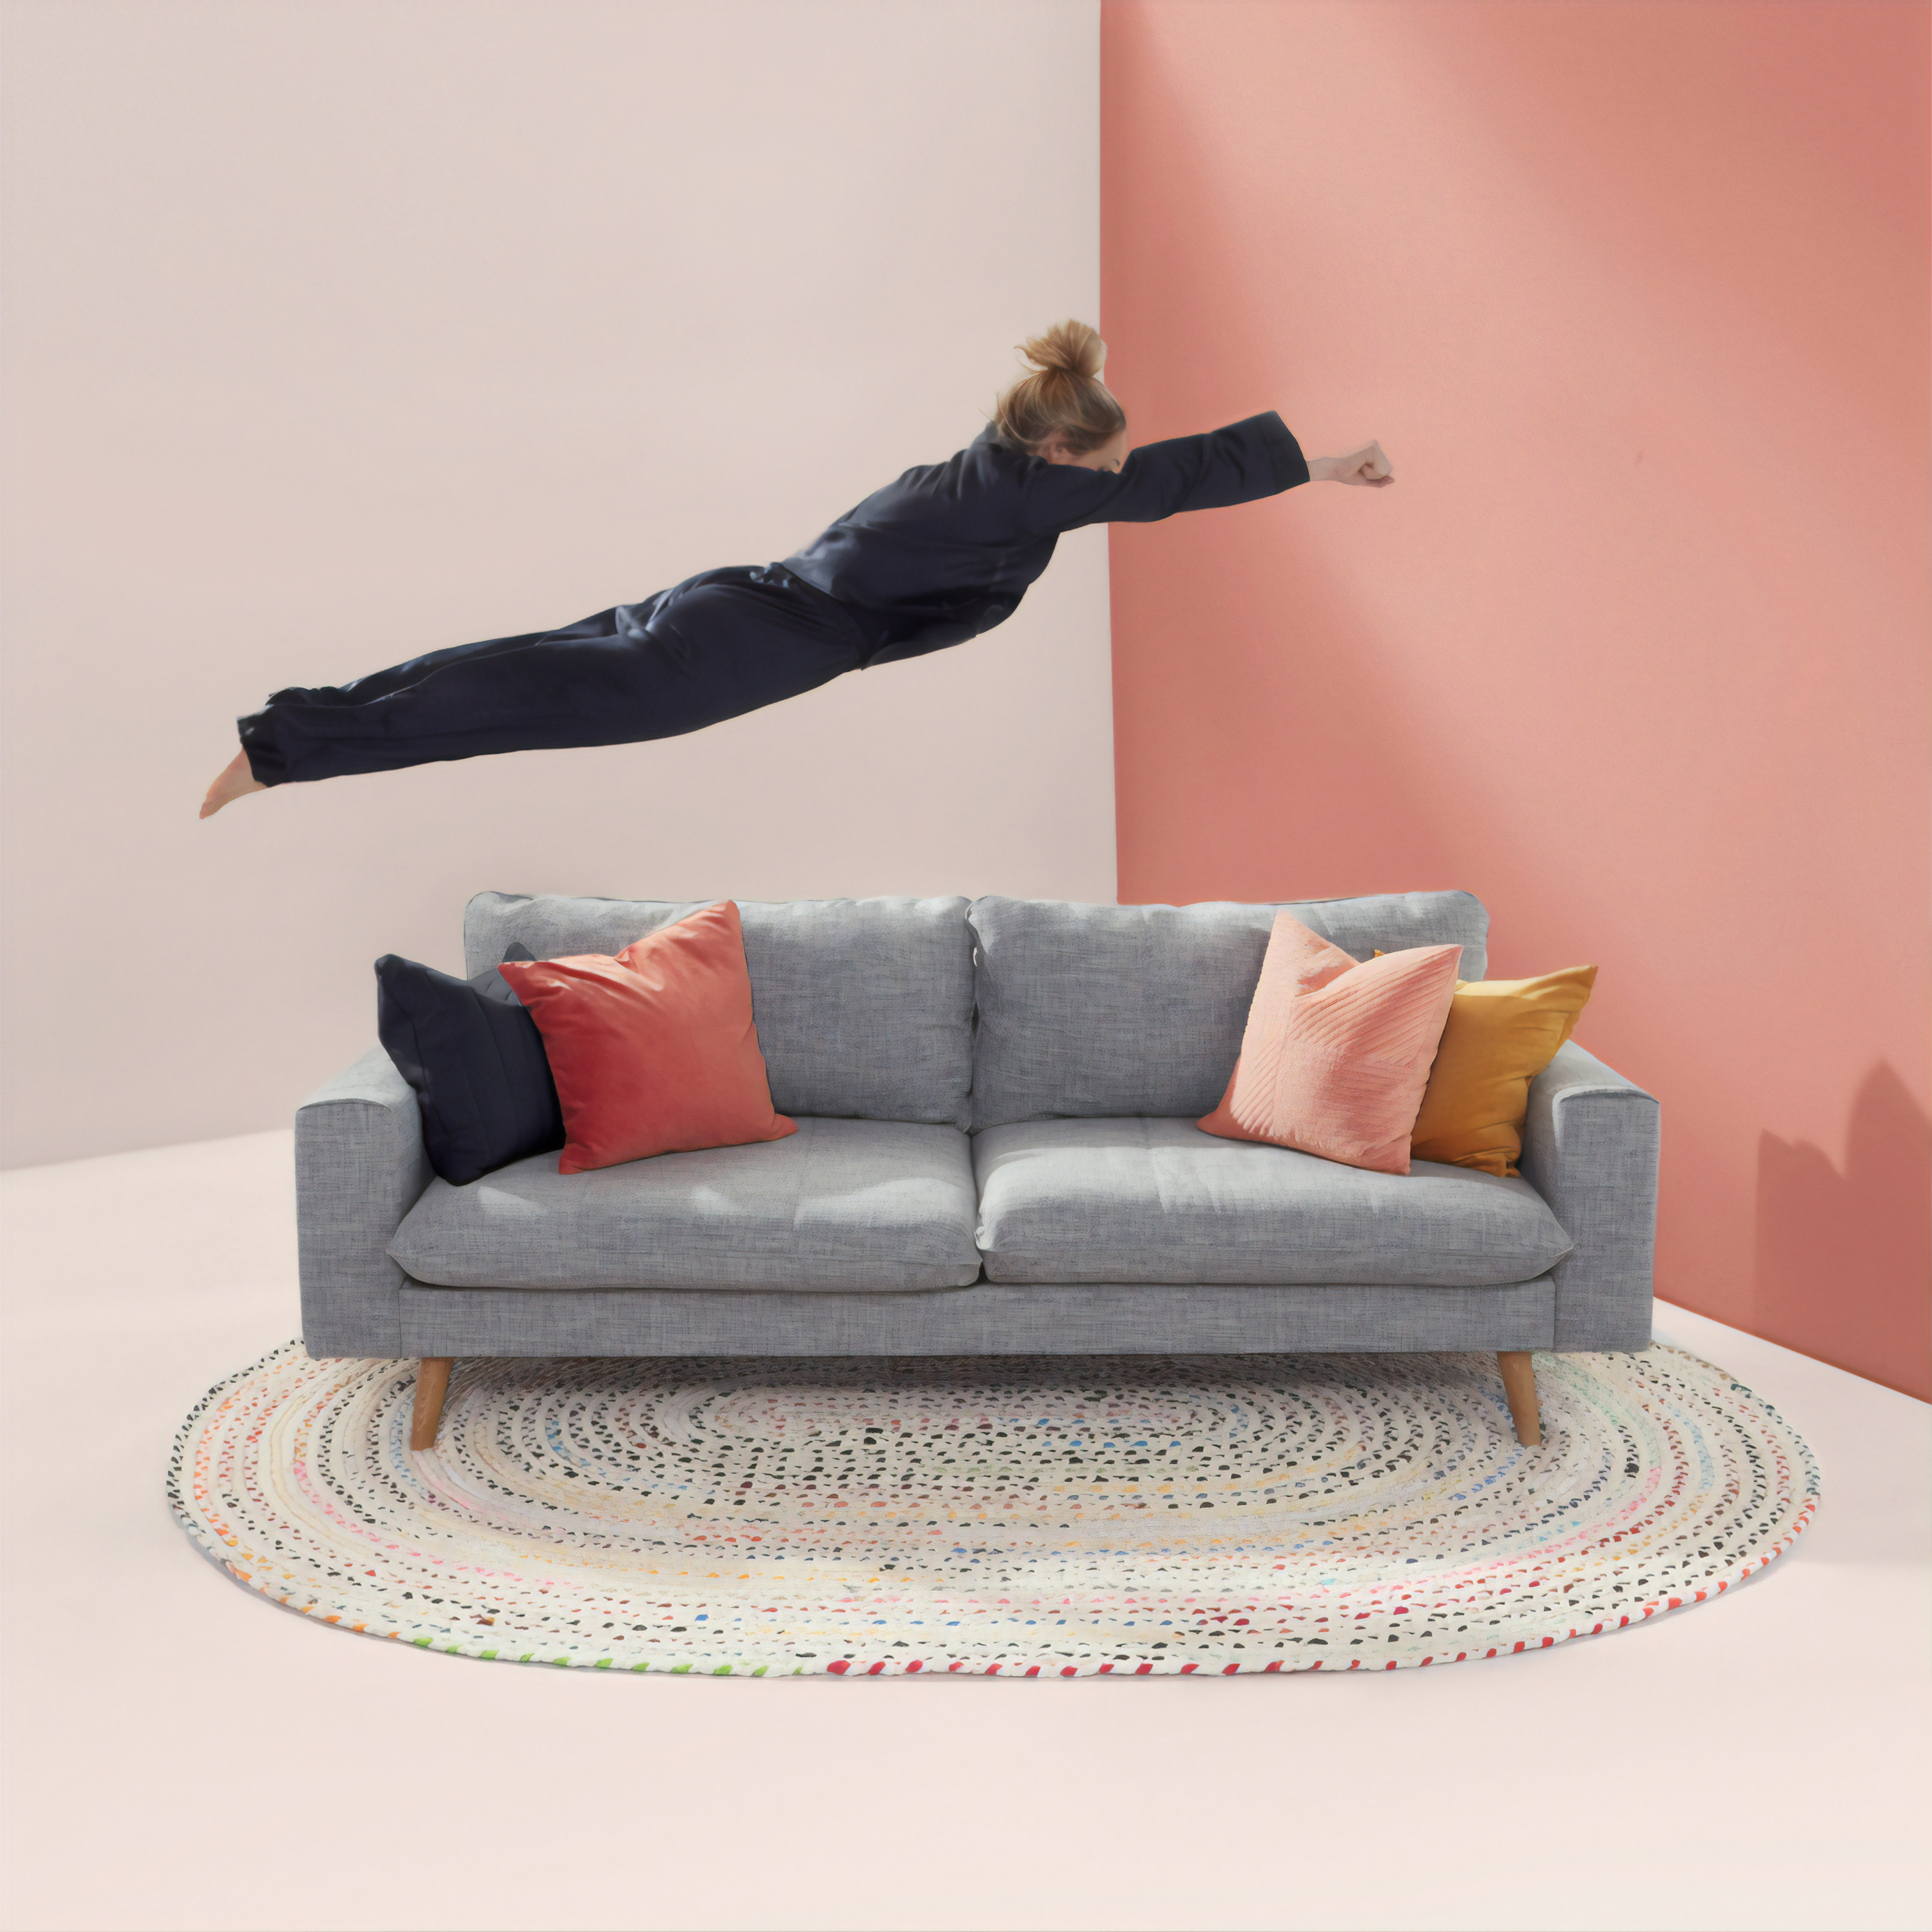 Create a trampoline out of your furniture with this nugget couch idea.